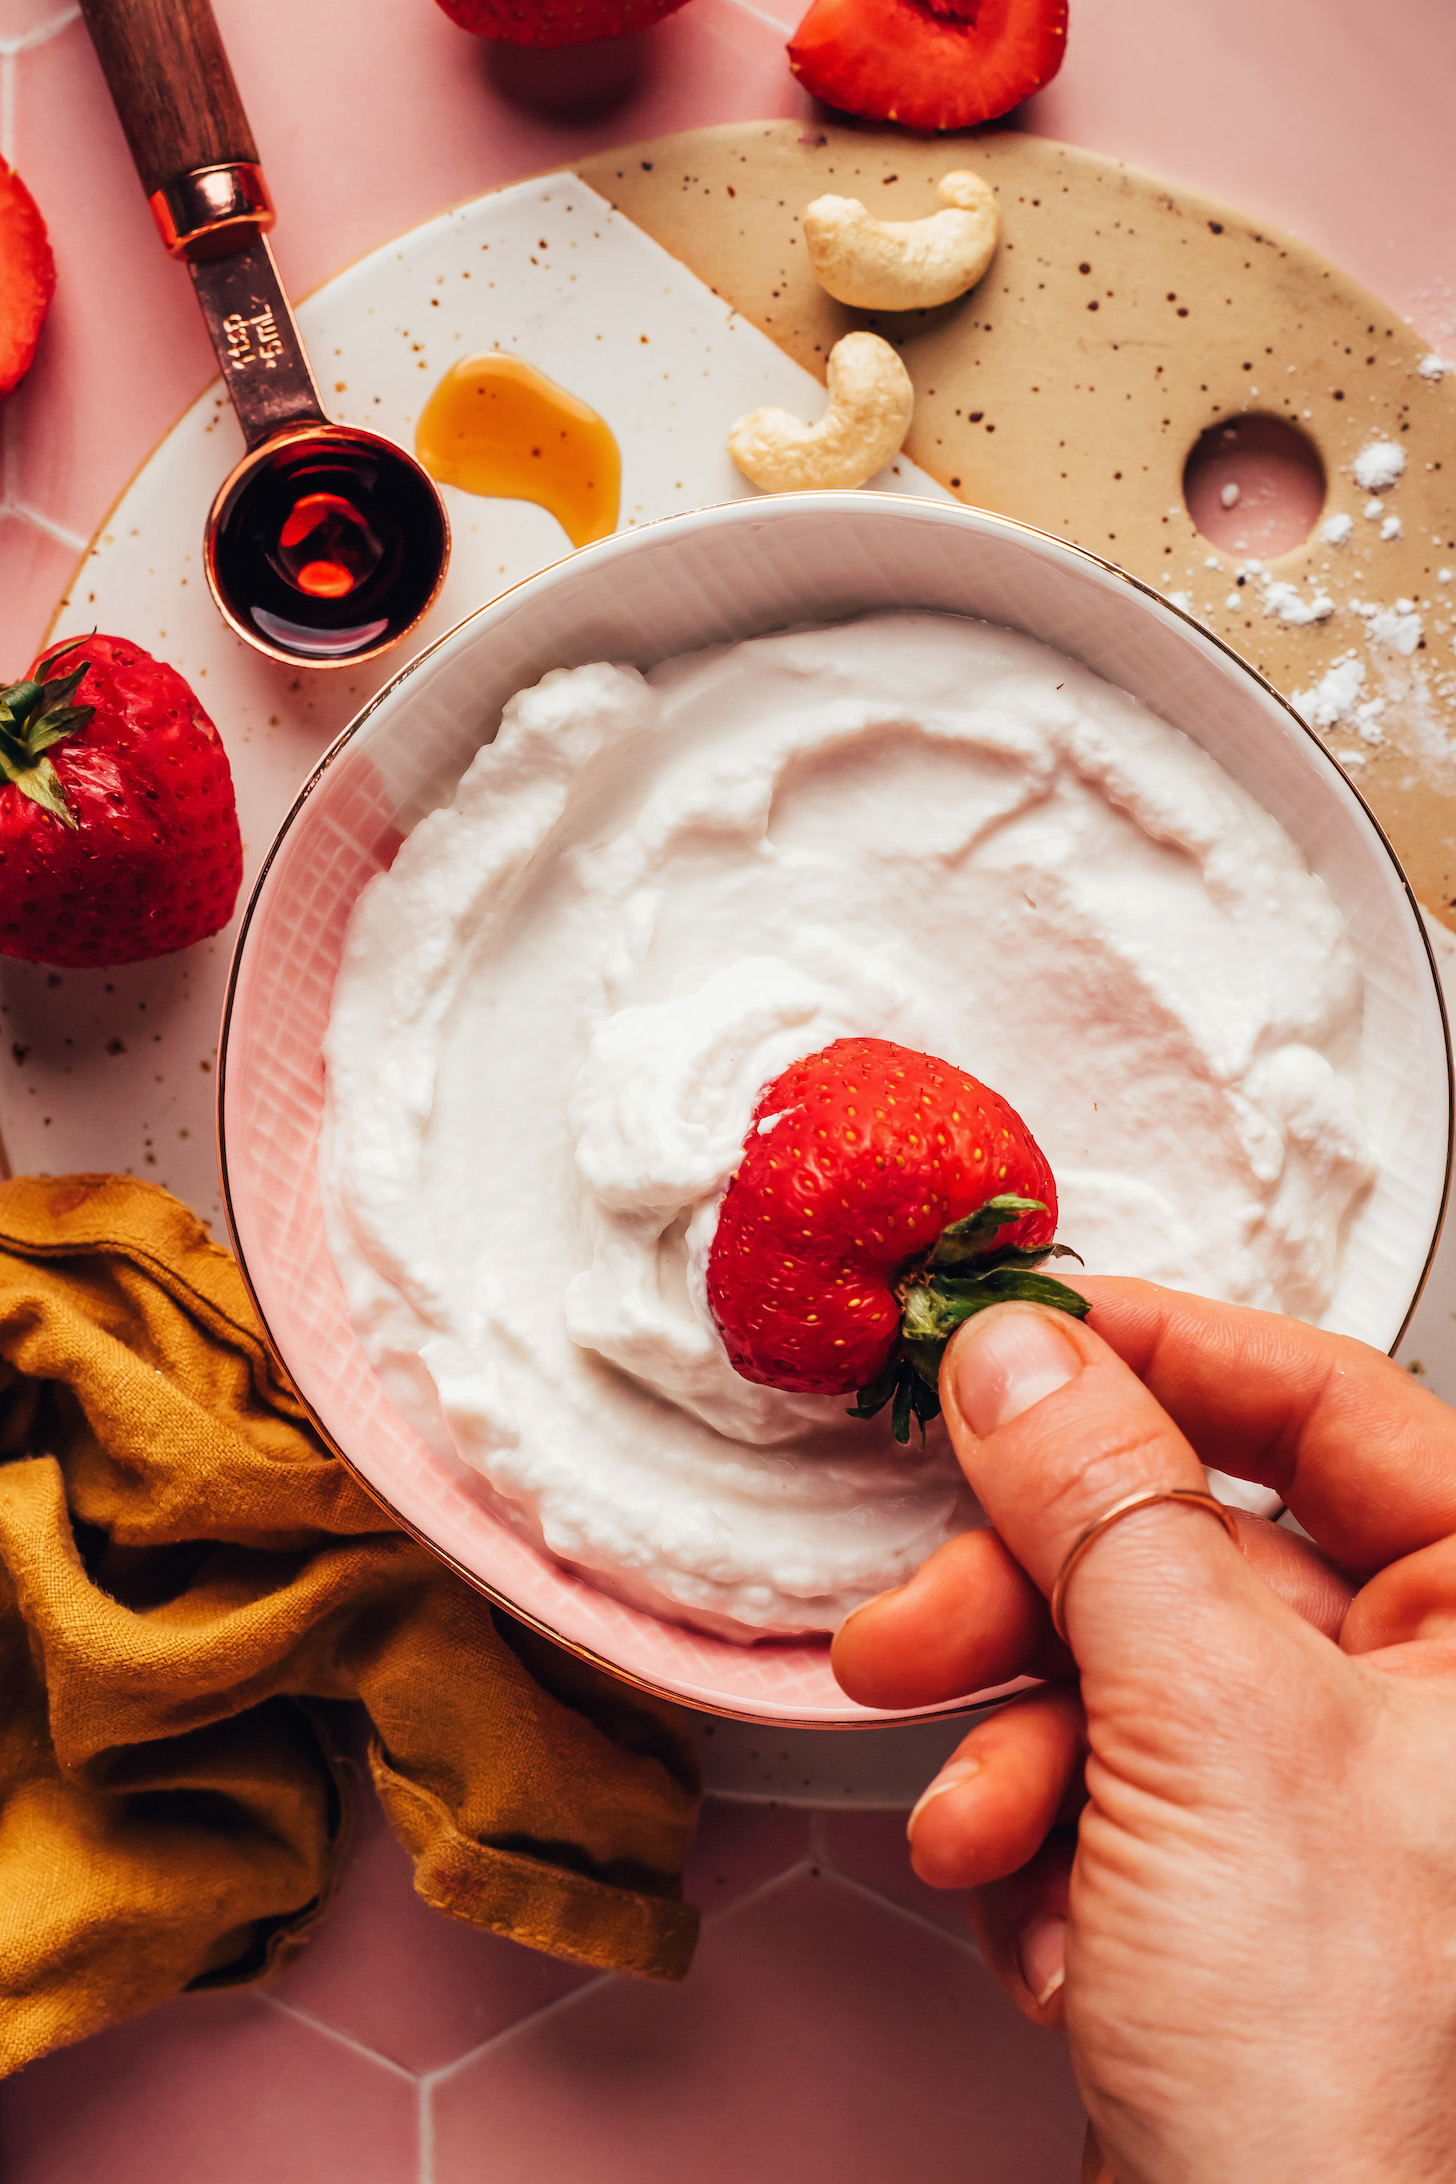 Dipping a fresh strawberry into a bowl of cashew whipped cream